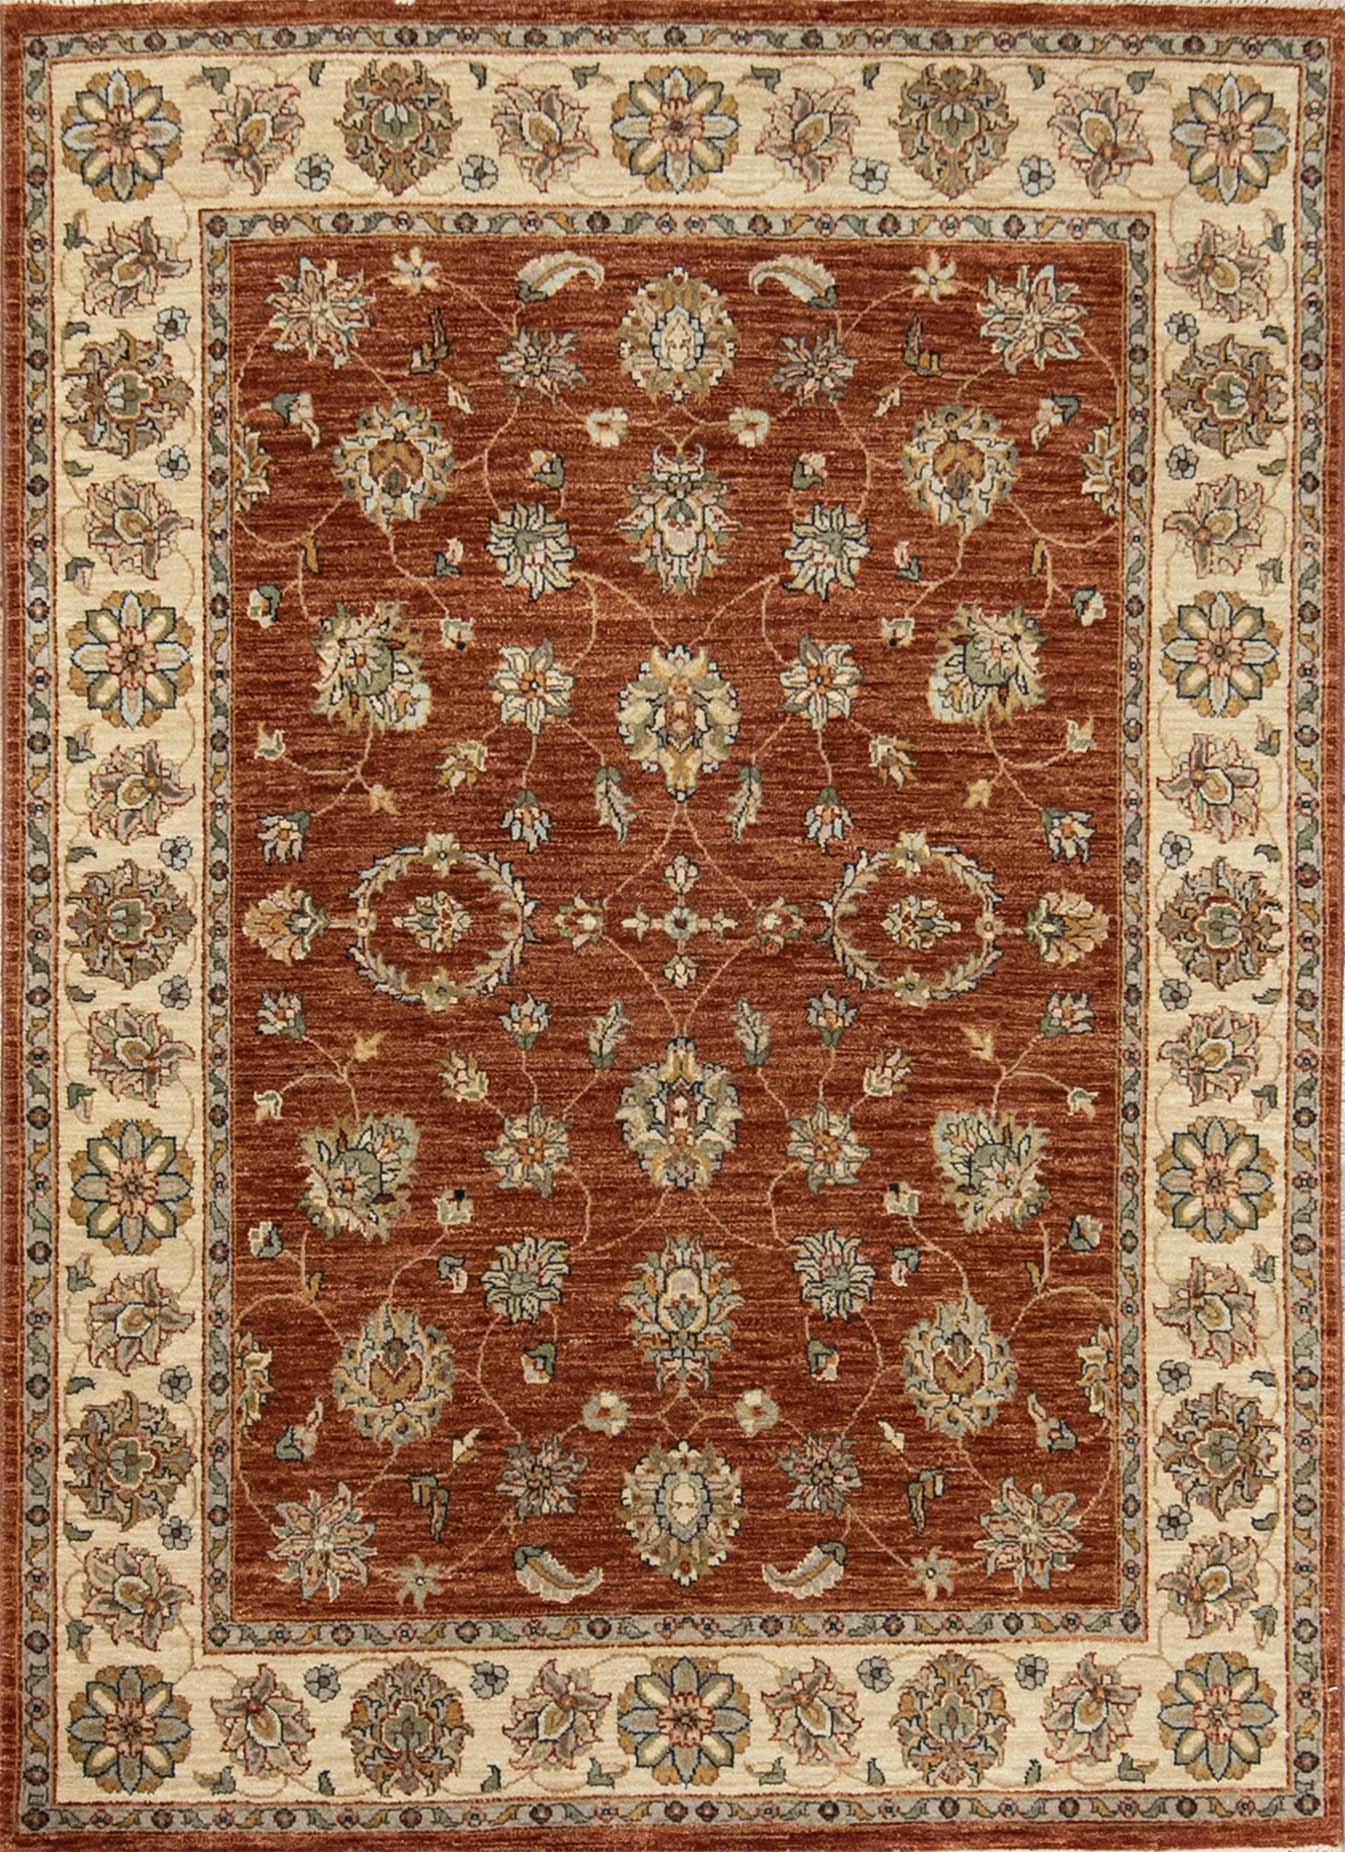 Rust oriental rug. Hand knotted wool transitional Oushak style rug made in India. Size 5.1x6.10.